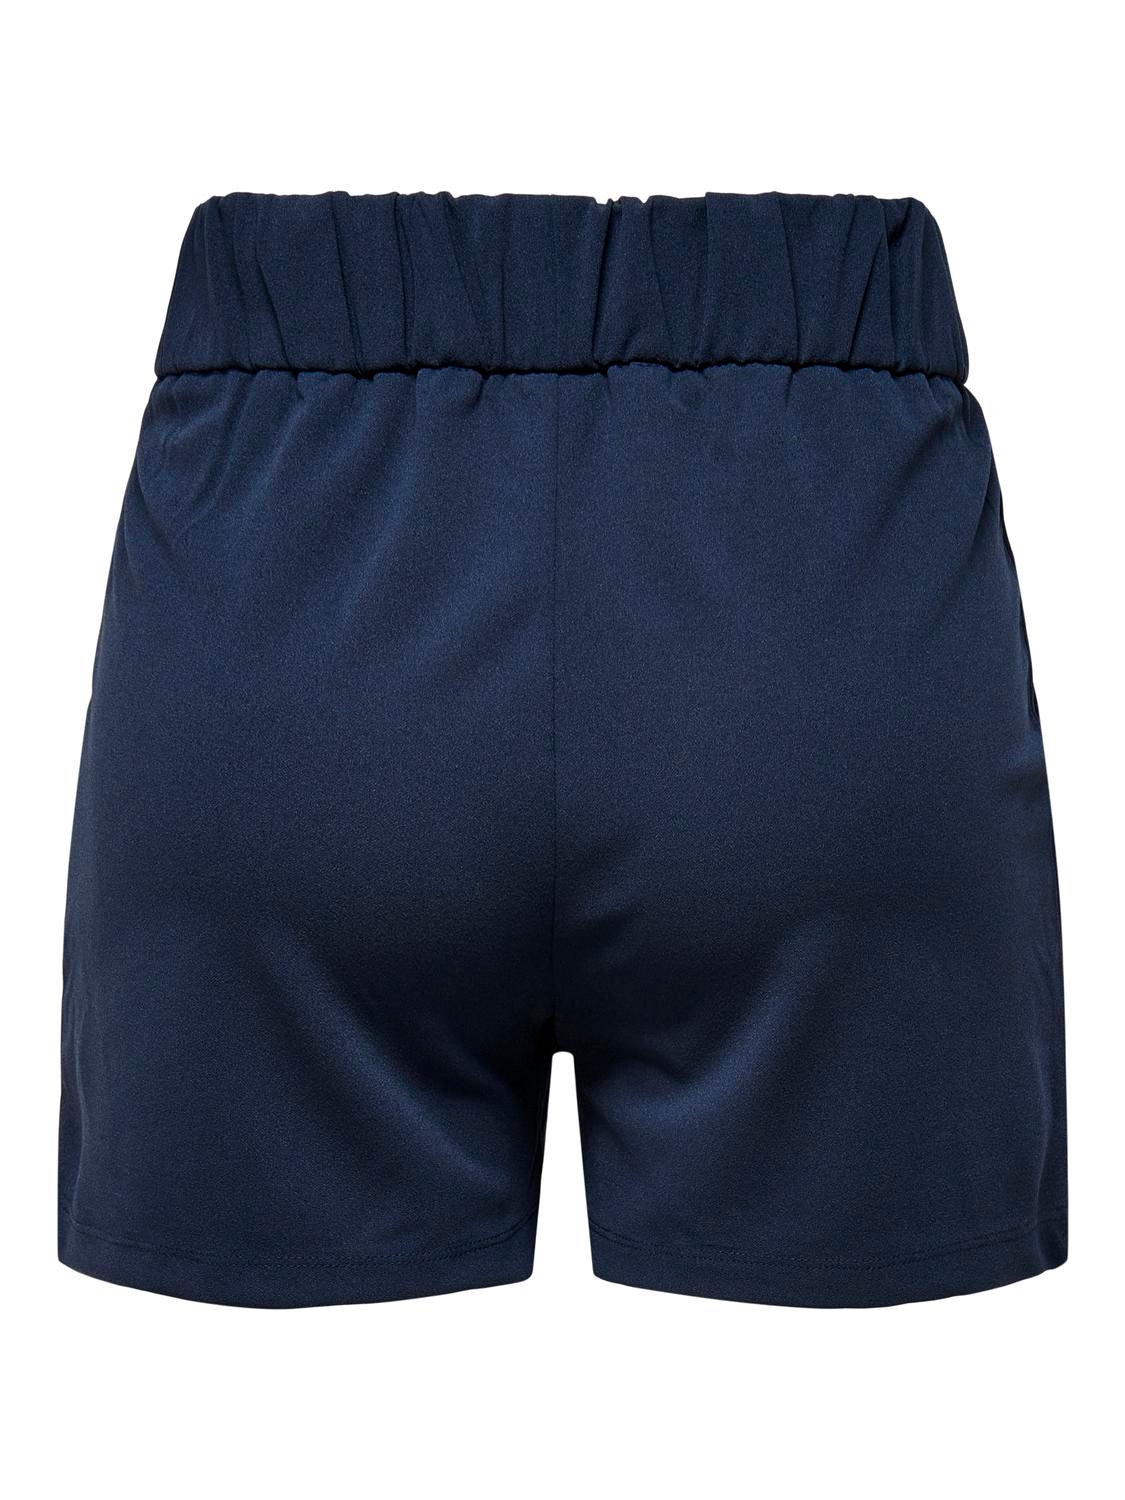 ONLY Solid colored Shorts -Black Iris - 15203098